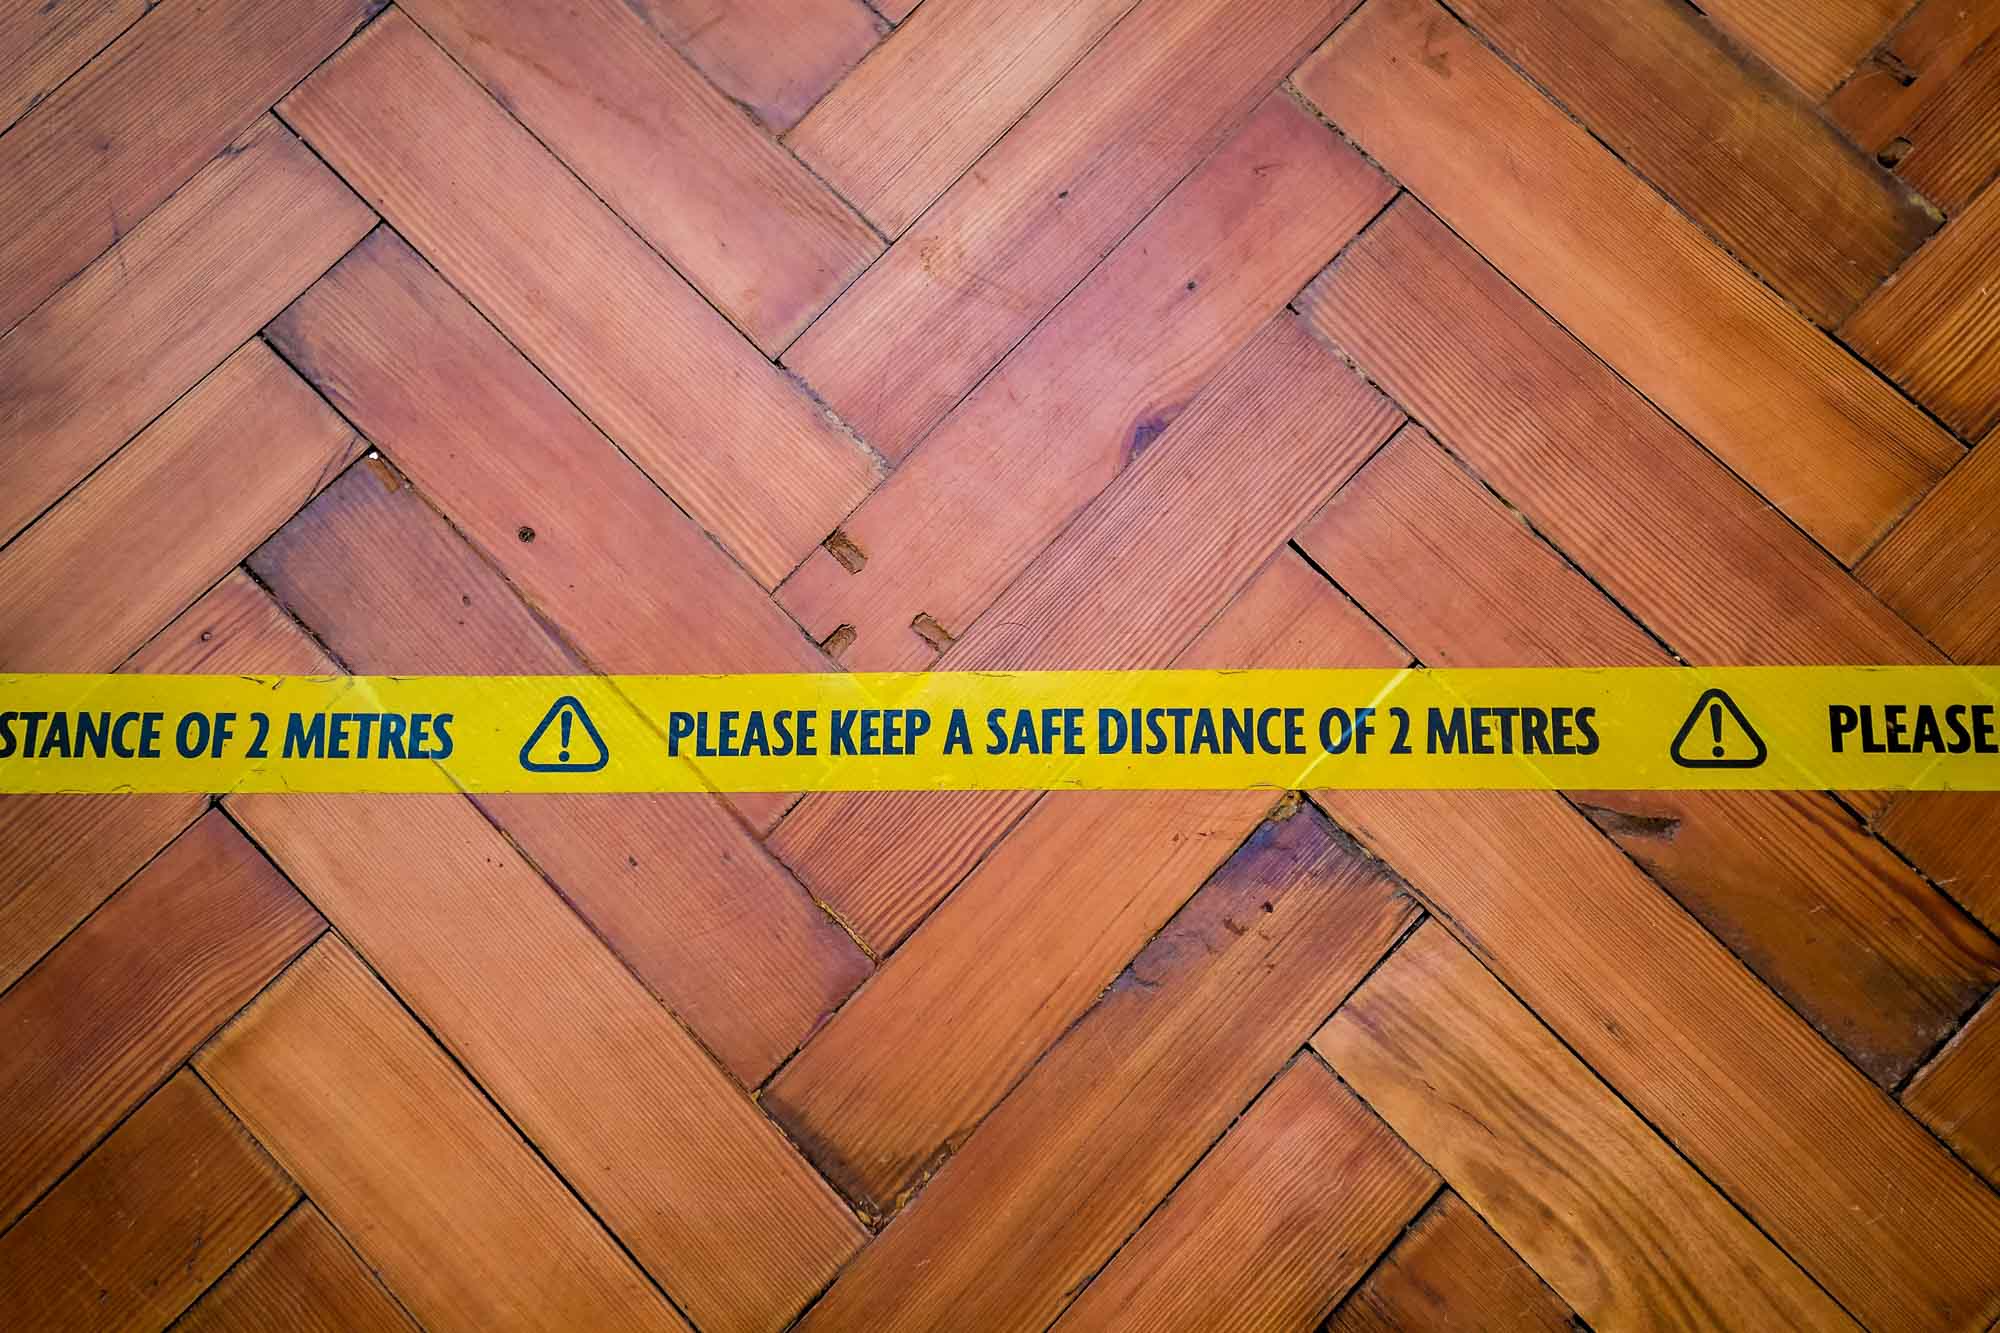 Yellow 'Please Keep a Safe Distance of 2 Metres' tape on wooden floor